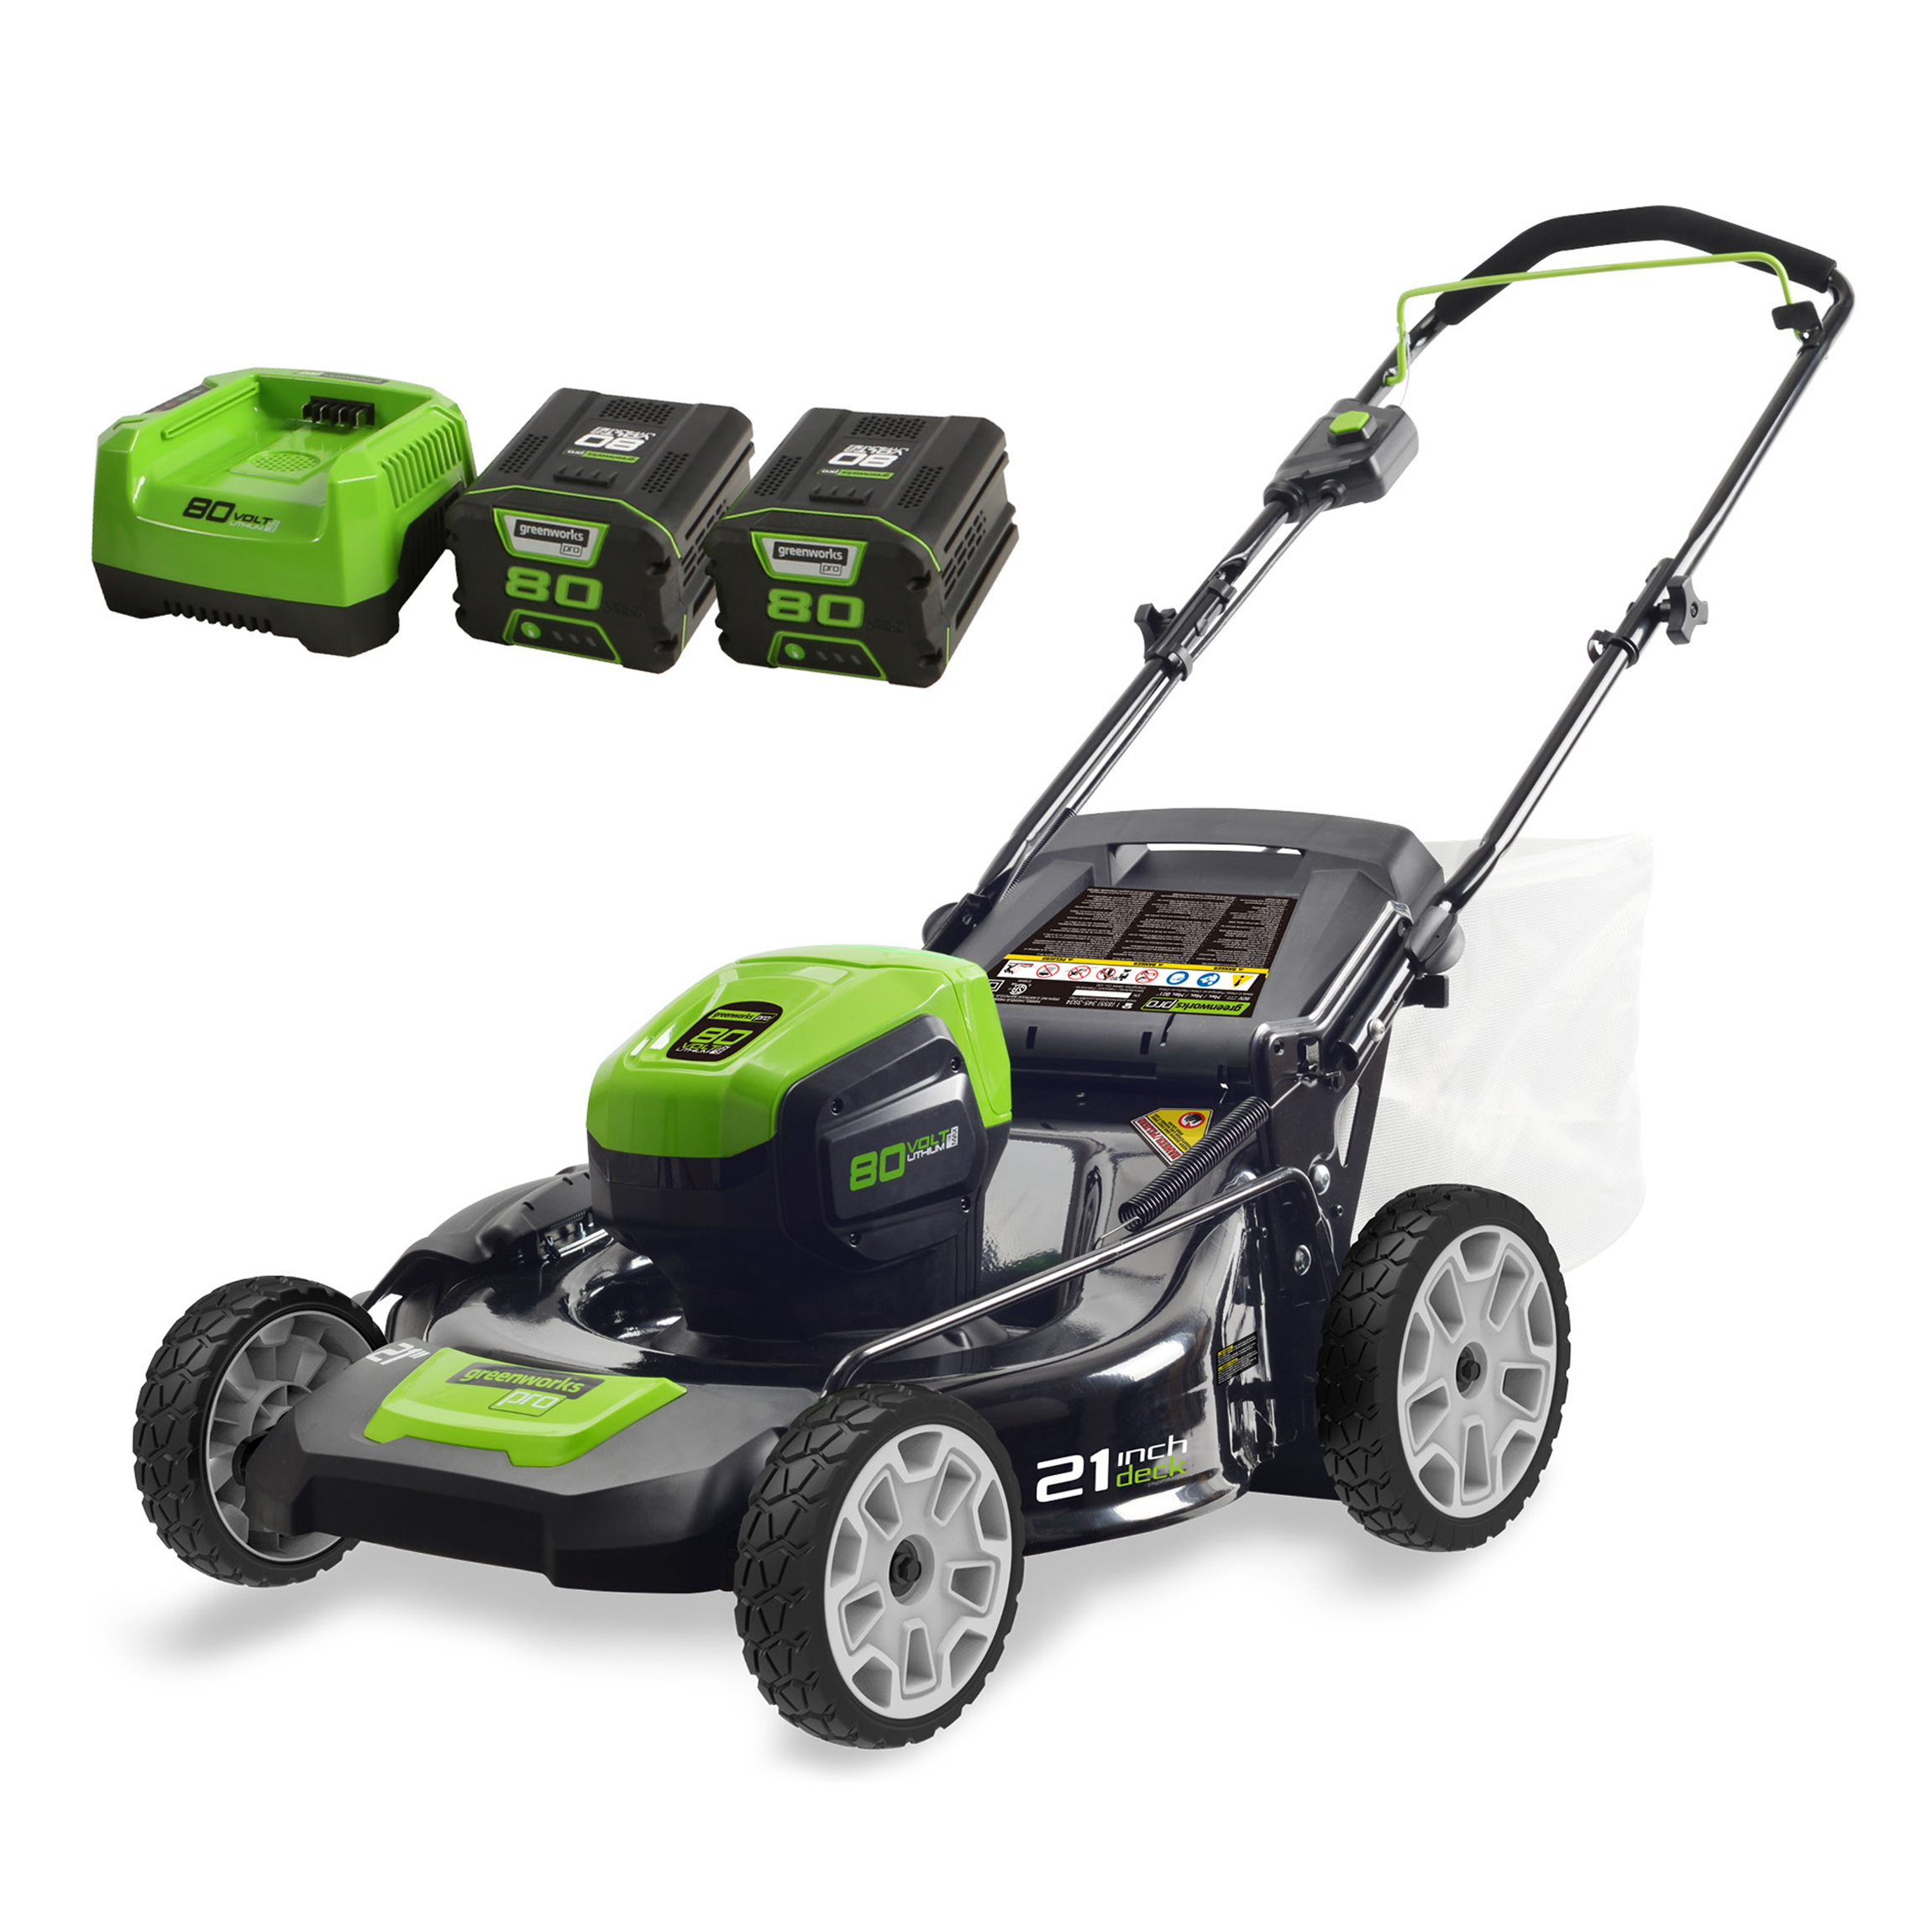 Greenworks 80V 21" Battery Powered Push Mower + (2) 2.0Ah Batteries & Rapid Charger - image 1 of 16